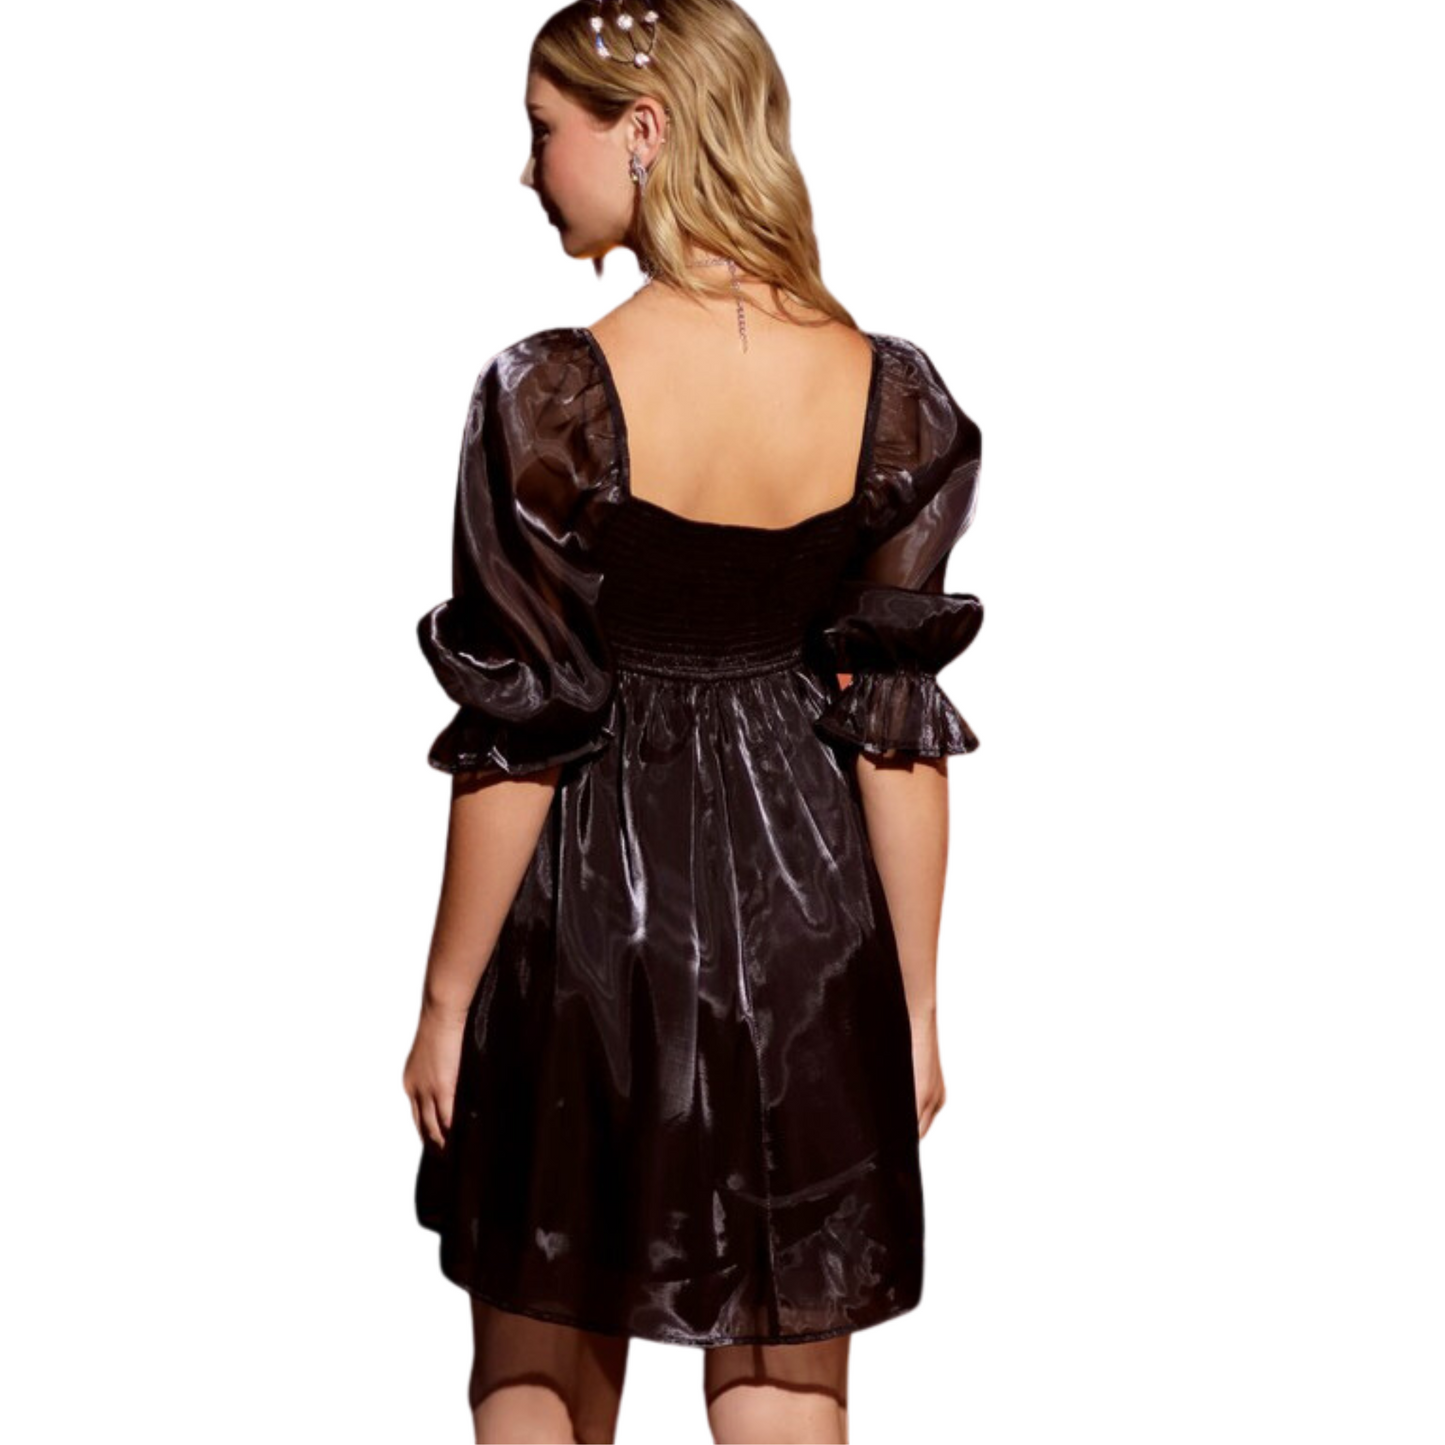 This classic satin babydoll dress is perfect for any occasion. Its stylish square neckline and elasticized puff sleeves give it a sophisticated look while its mini length and smock back lend an effortless allure. The dress is fully lined, guaranteeing comfort and quality.